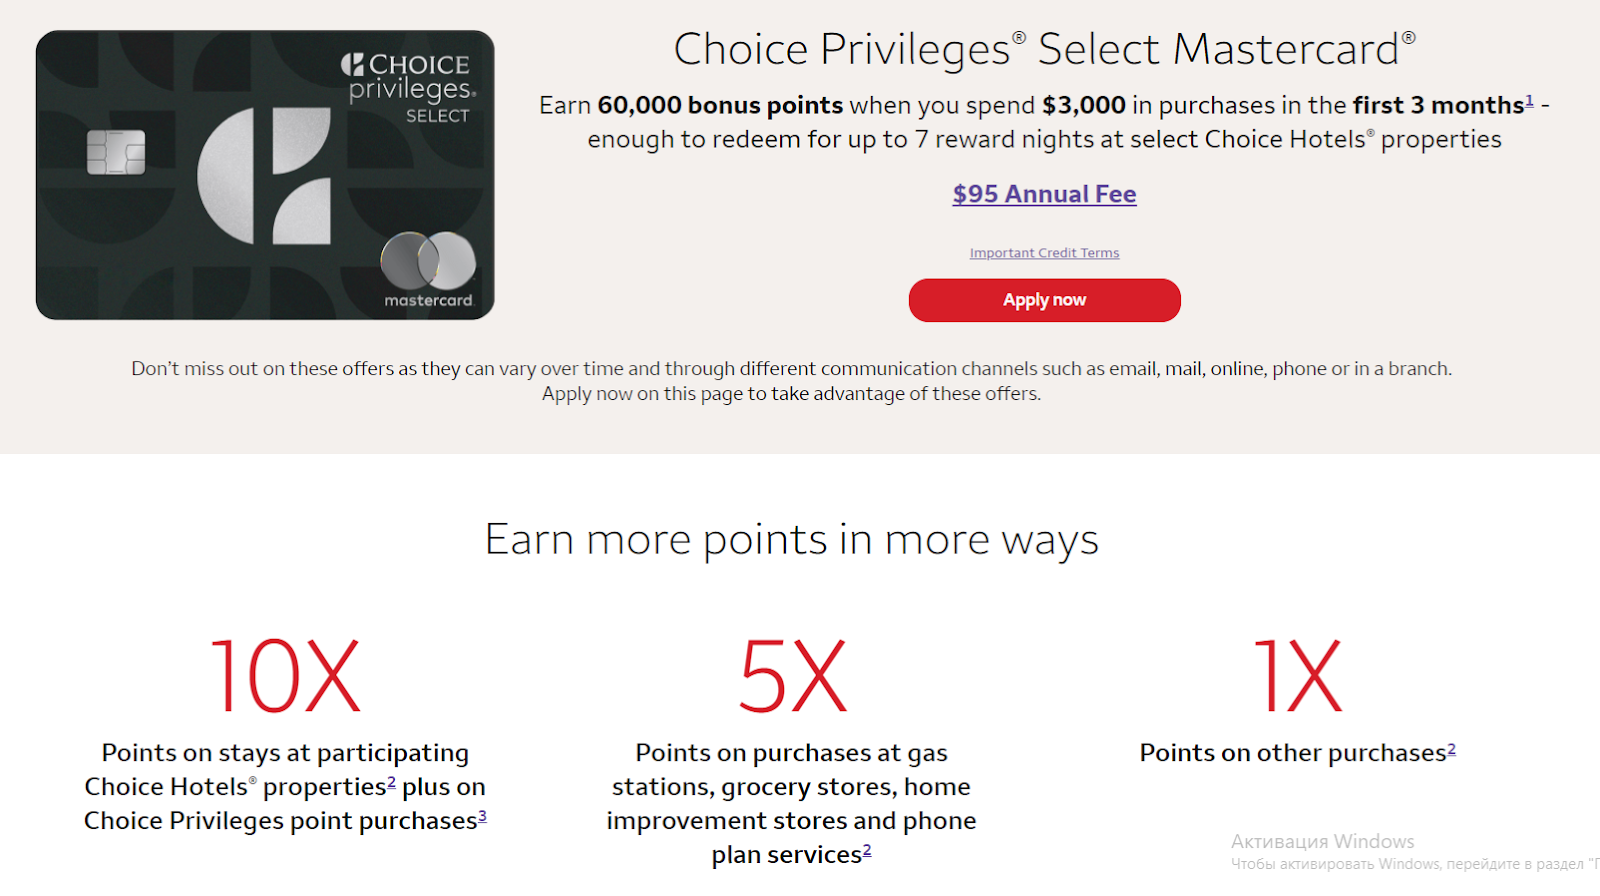 Choice Privileges Select Mastercard